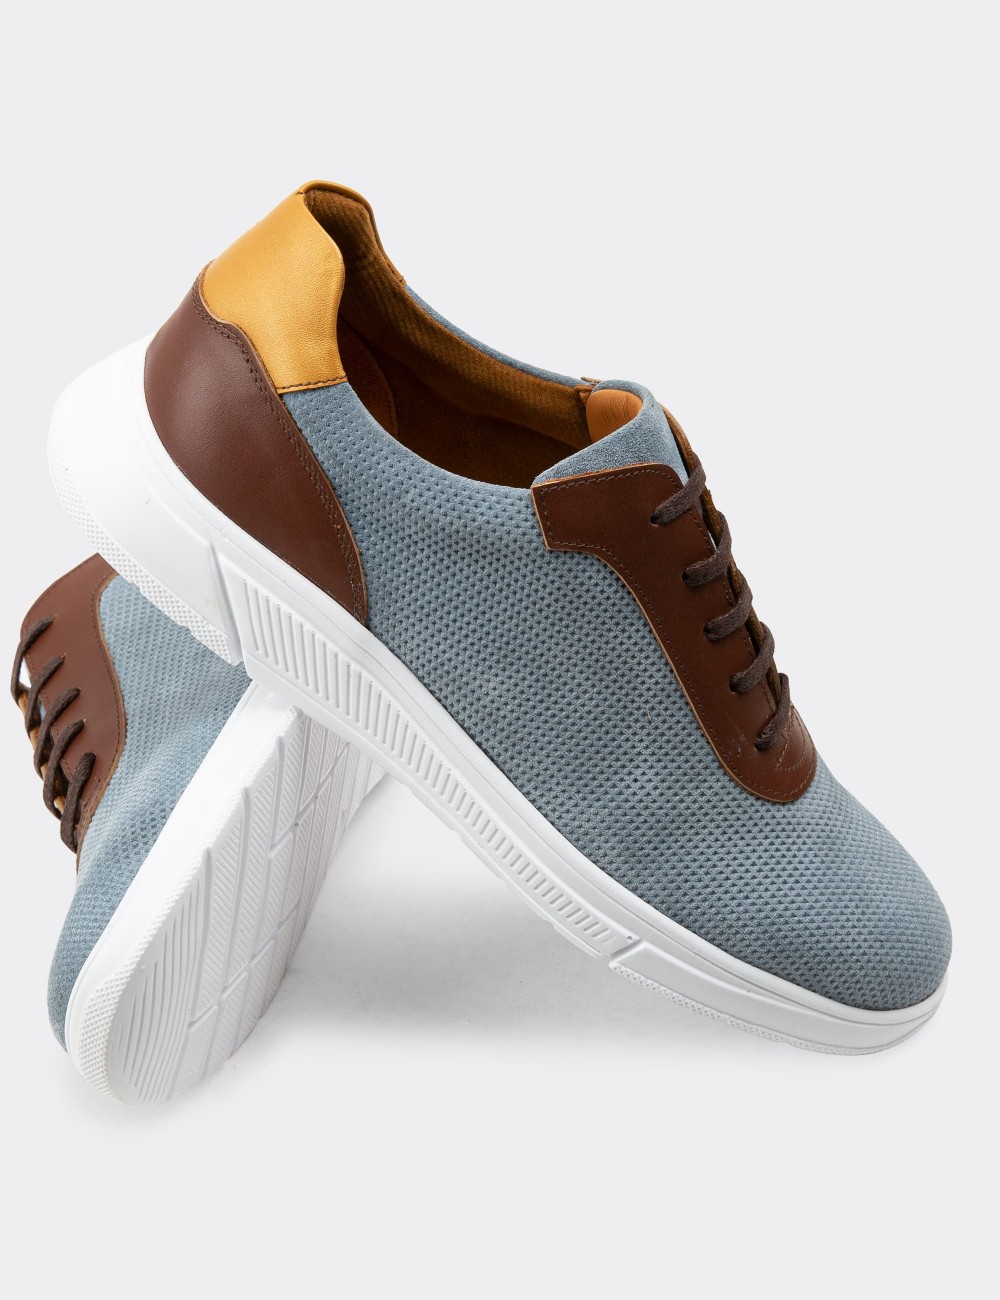 Blue Nubuck Leather Sneakers - 01879MMVIC01